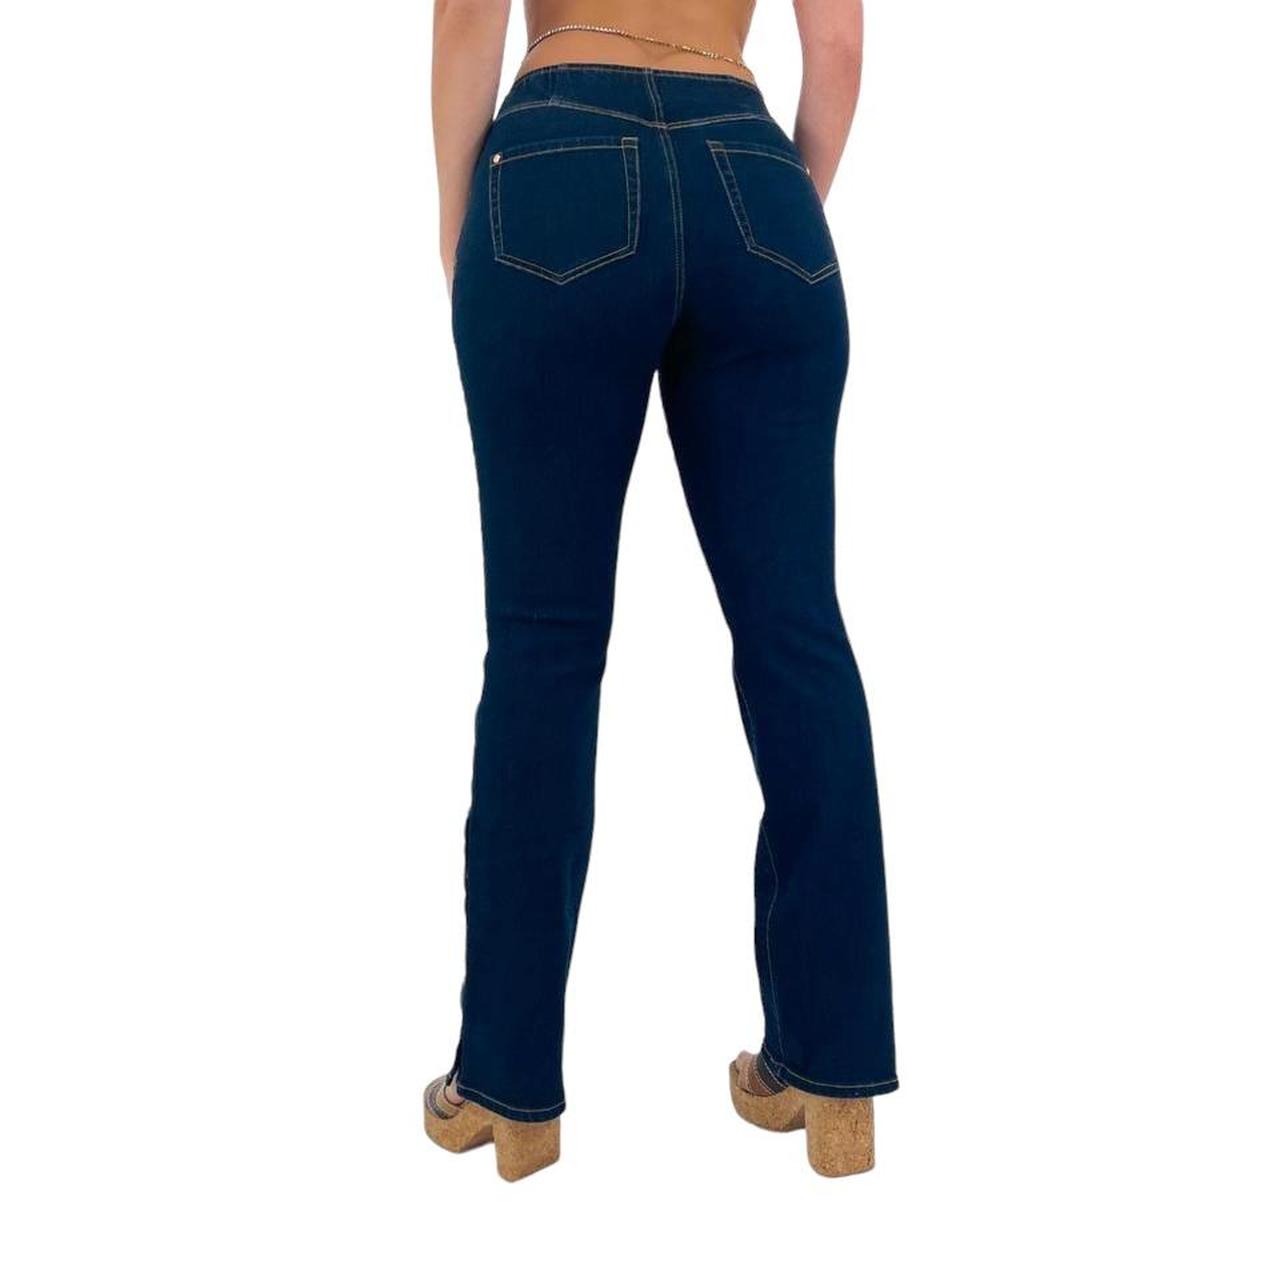 Y2k Vintage Dark Denim Stretchy High-Waisted Pants w/ White Stitching + Gold Buttons [M]